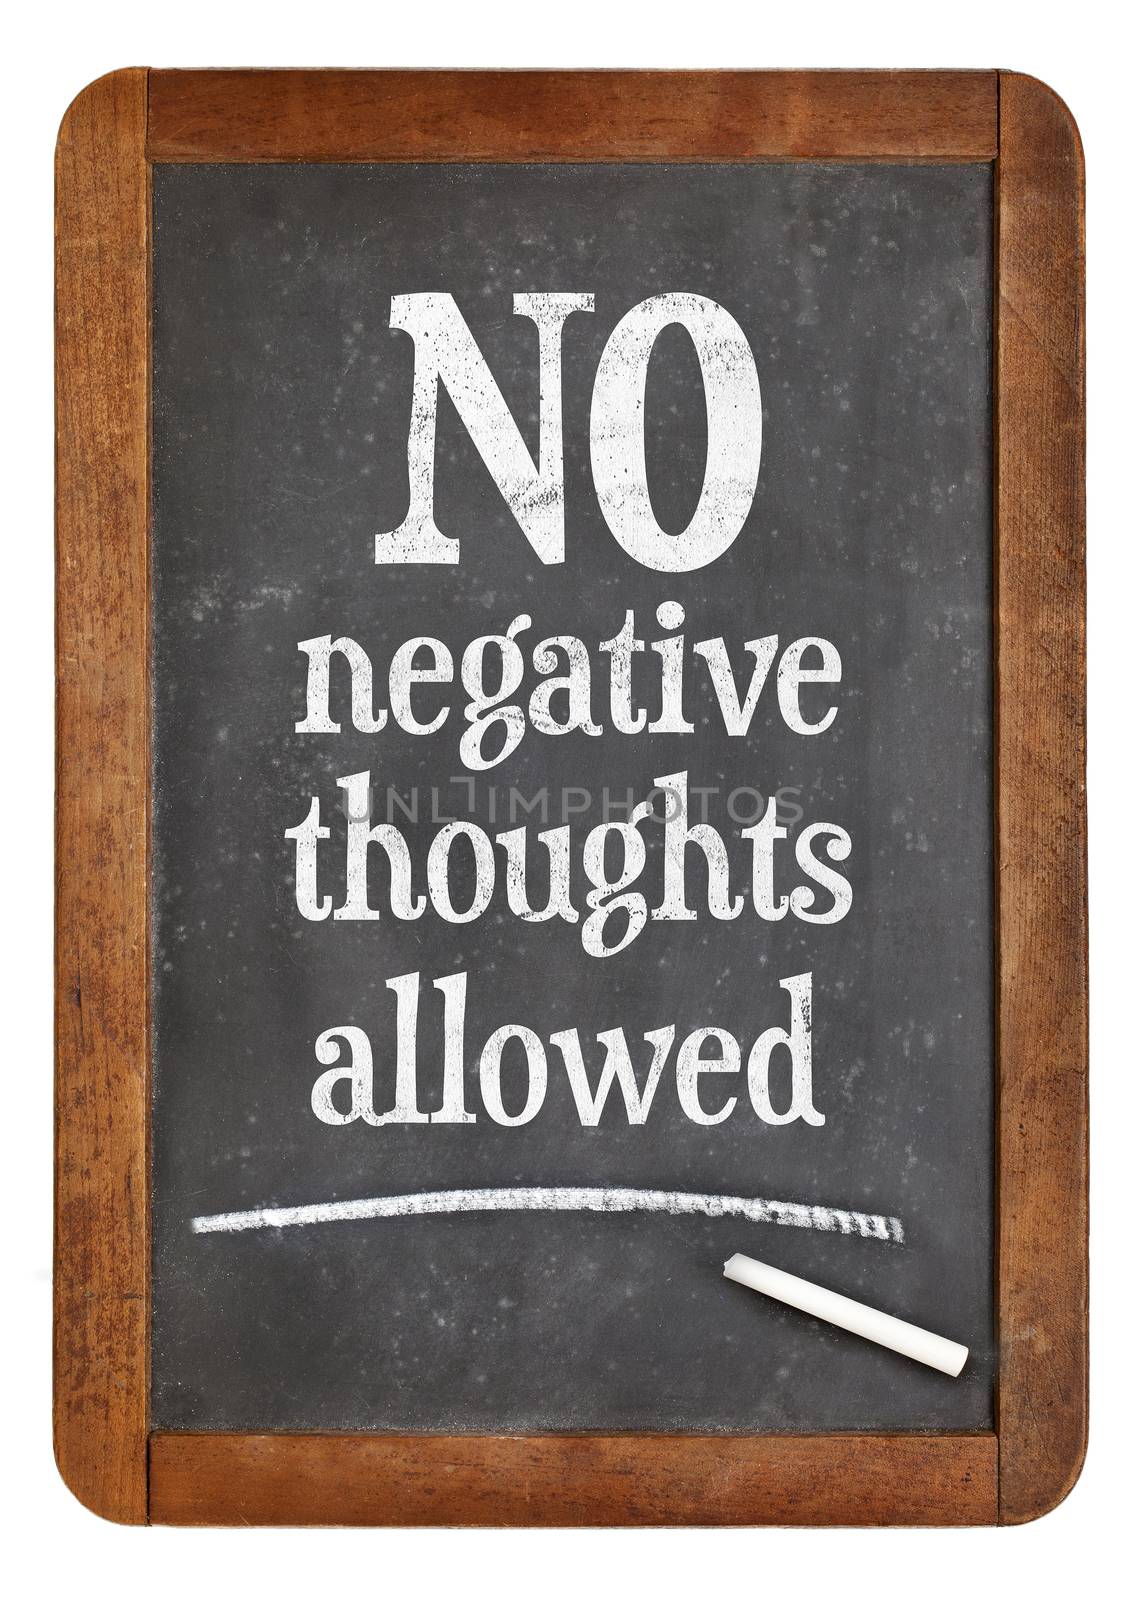 No negative thoughts allowed by PixelsAway